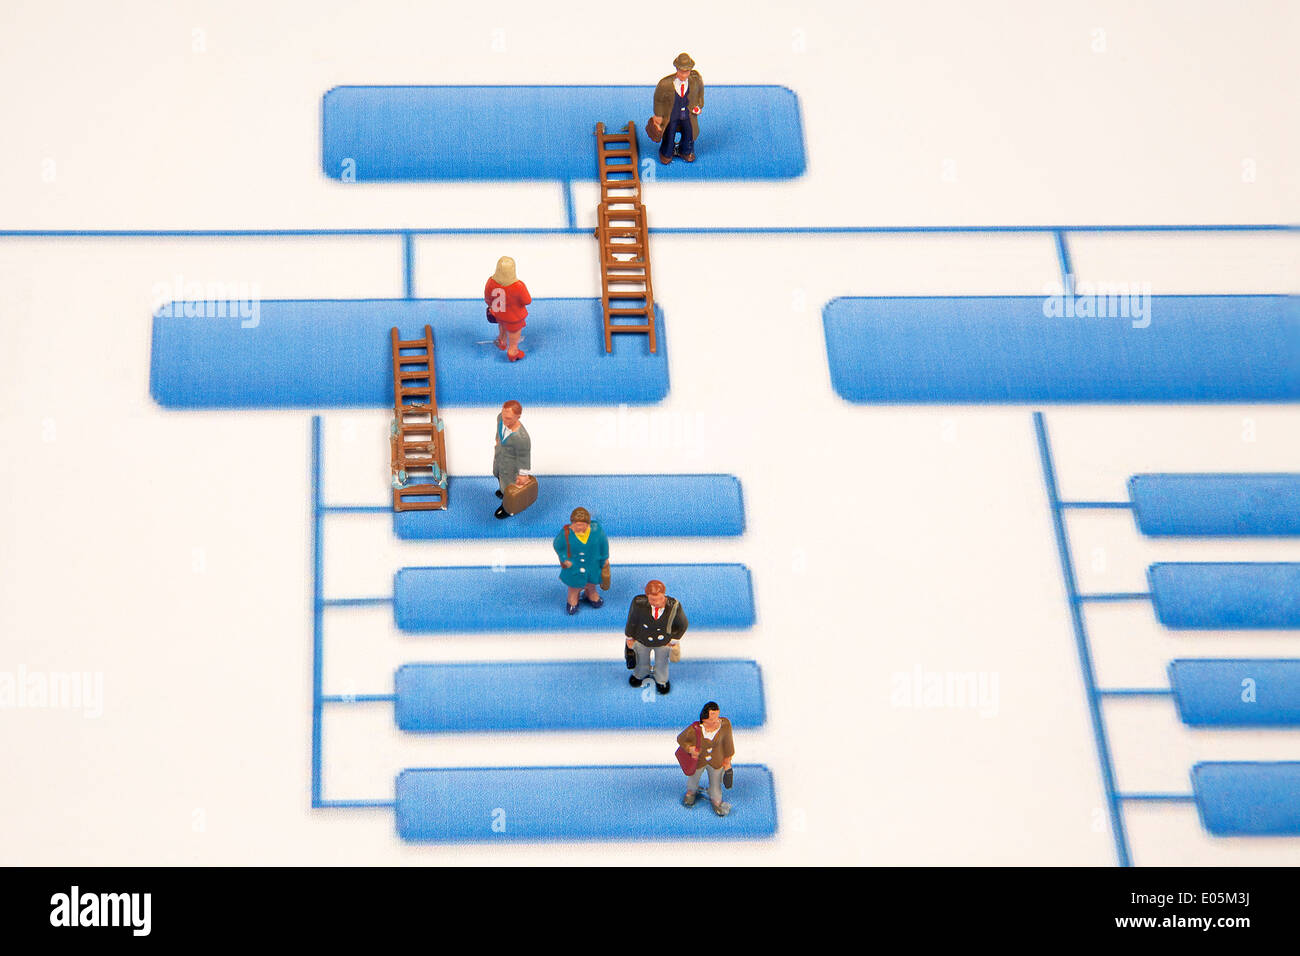 Figurines of business men and women staggered on an organizational chart with ladders between Stock Photo